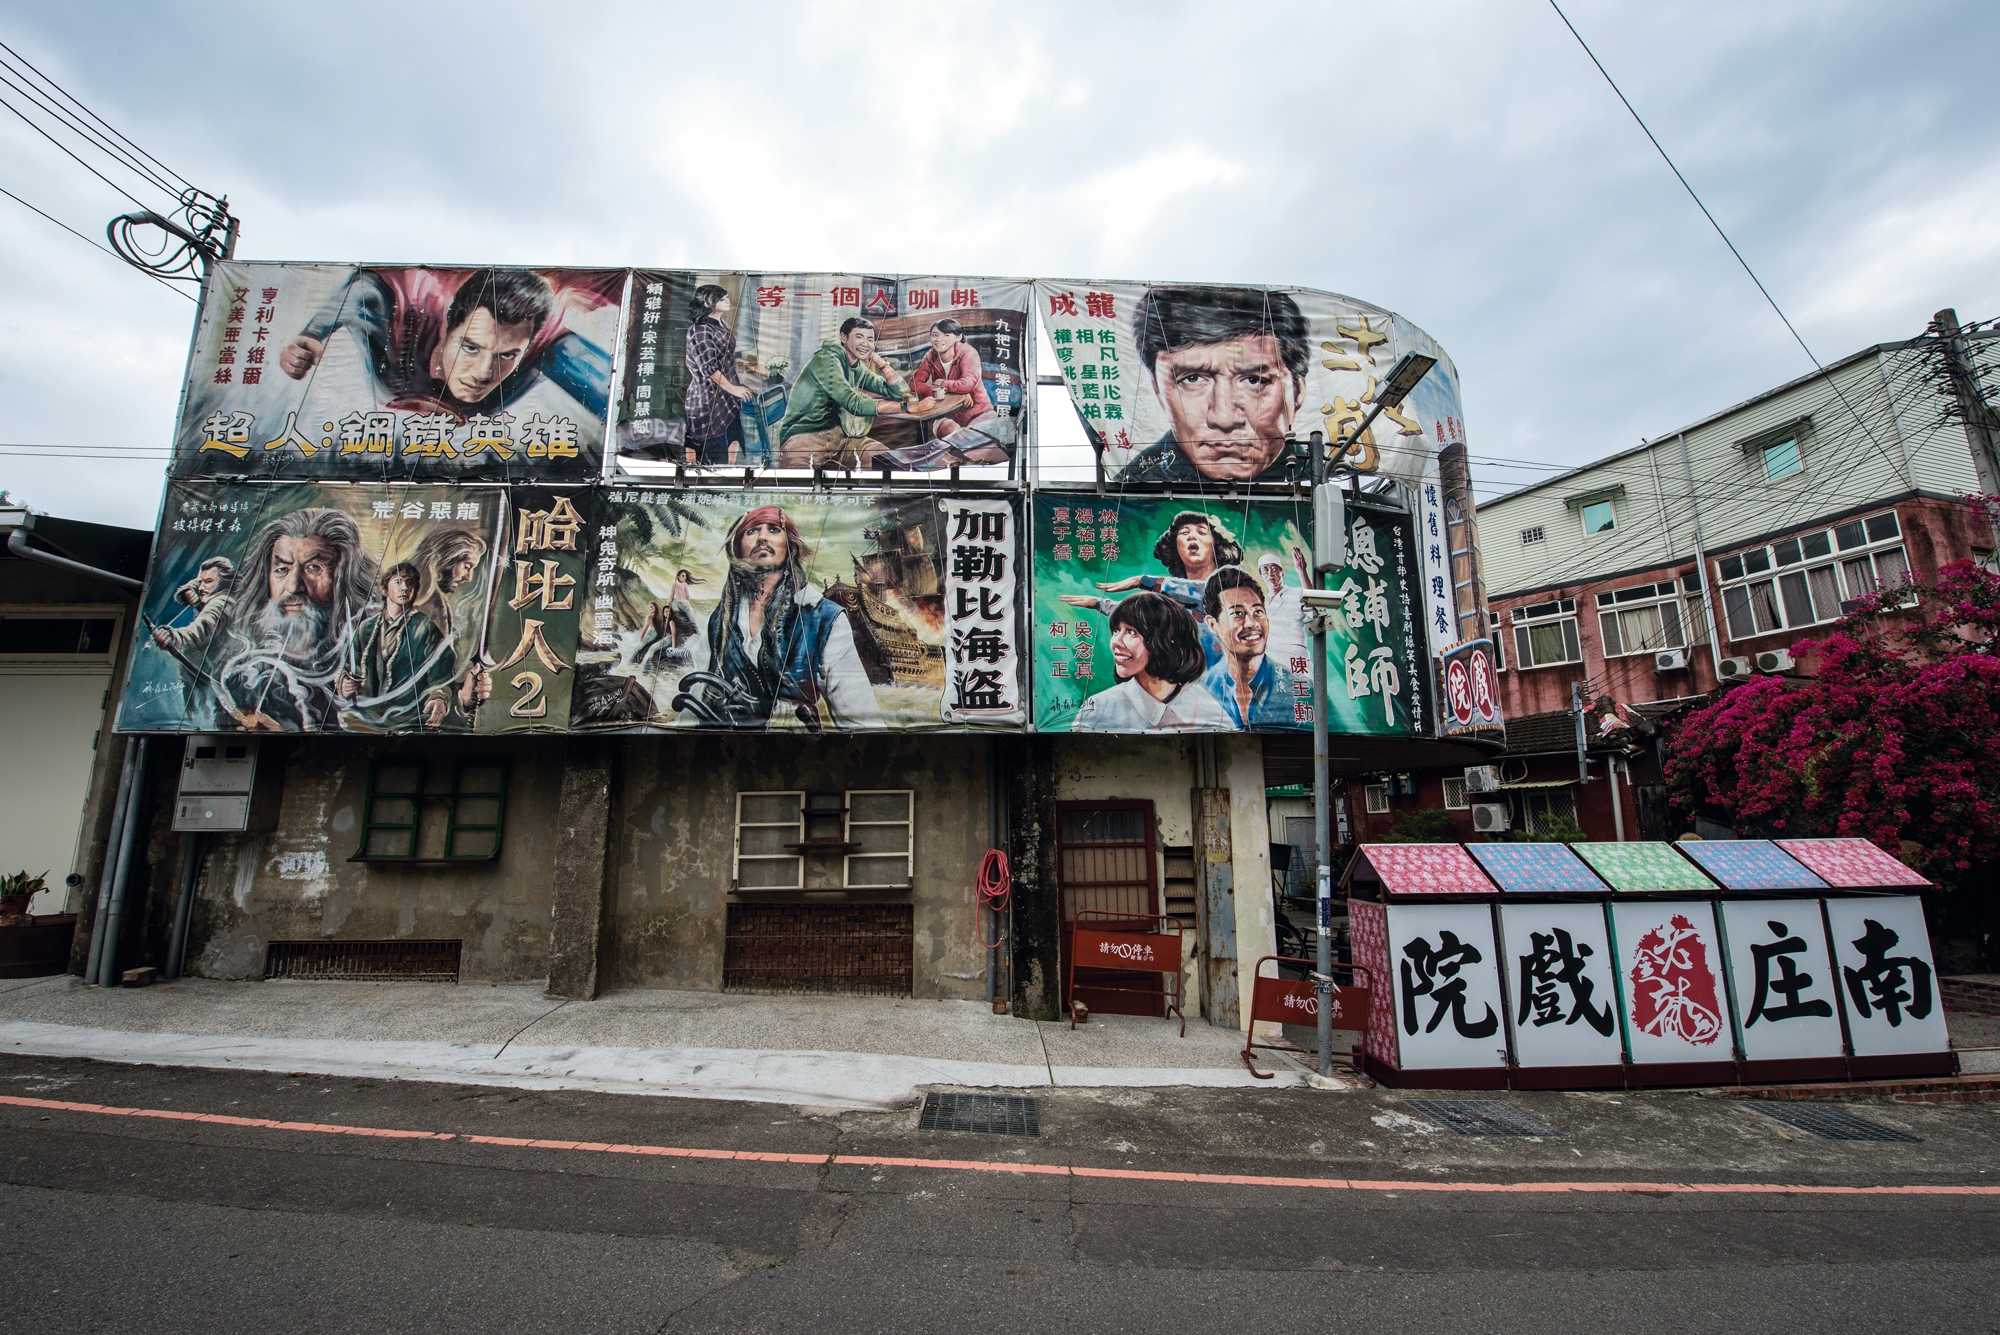 Still Portraits for Moving Pictures: Taiwan's Cinema Billboard Art